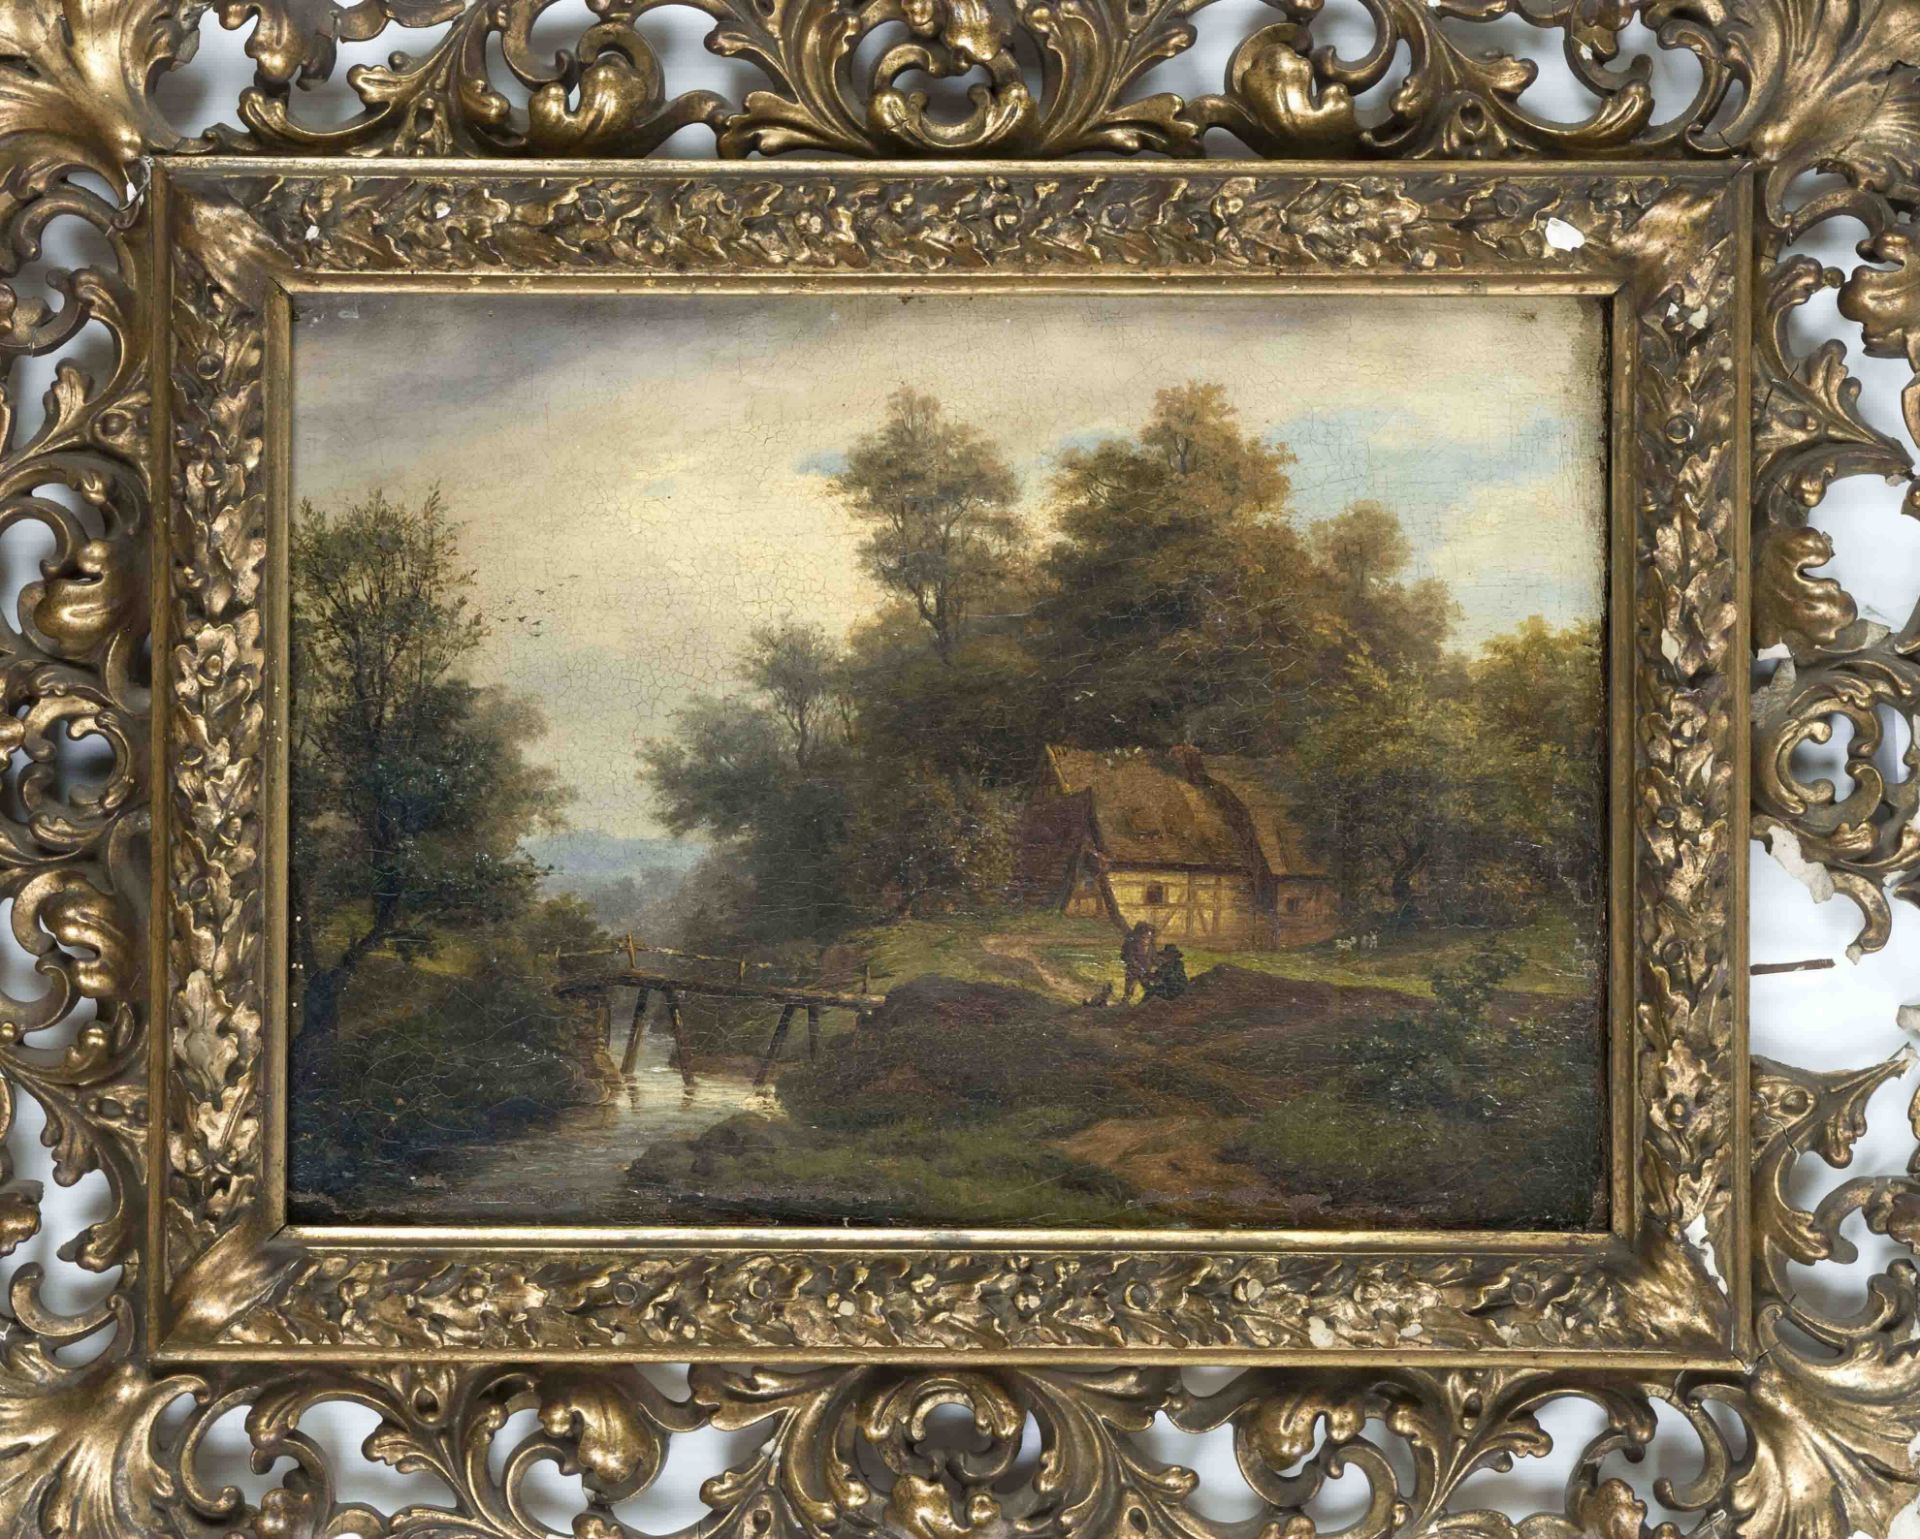 Anonymous German painter of the 19th century, Landscape with wooden bridge and staffage, oil on